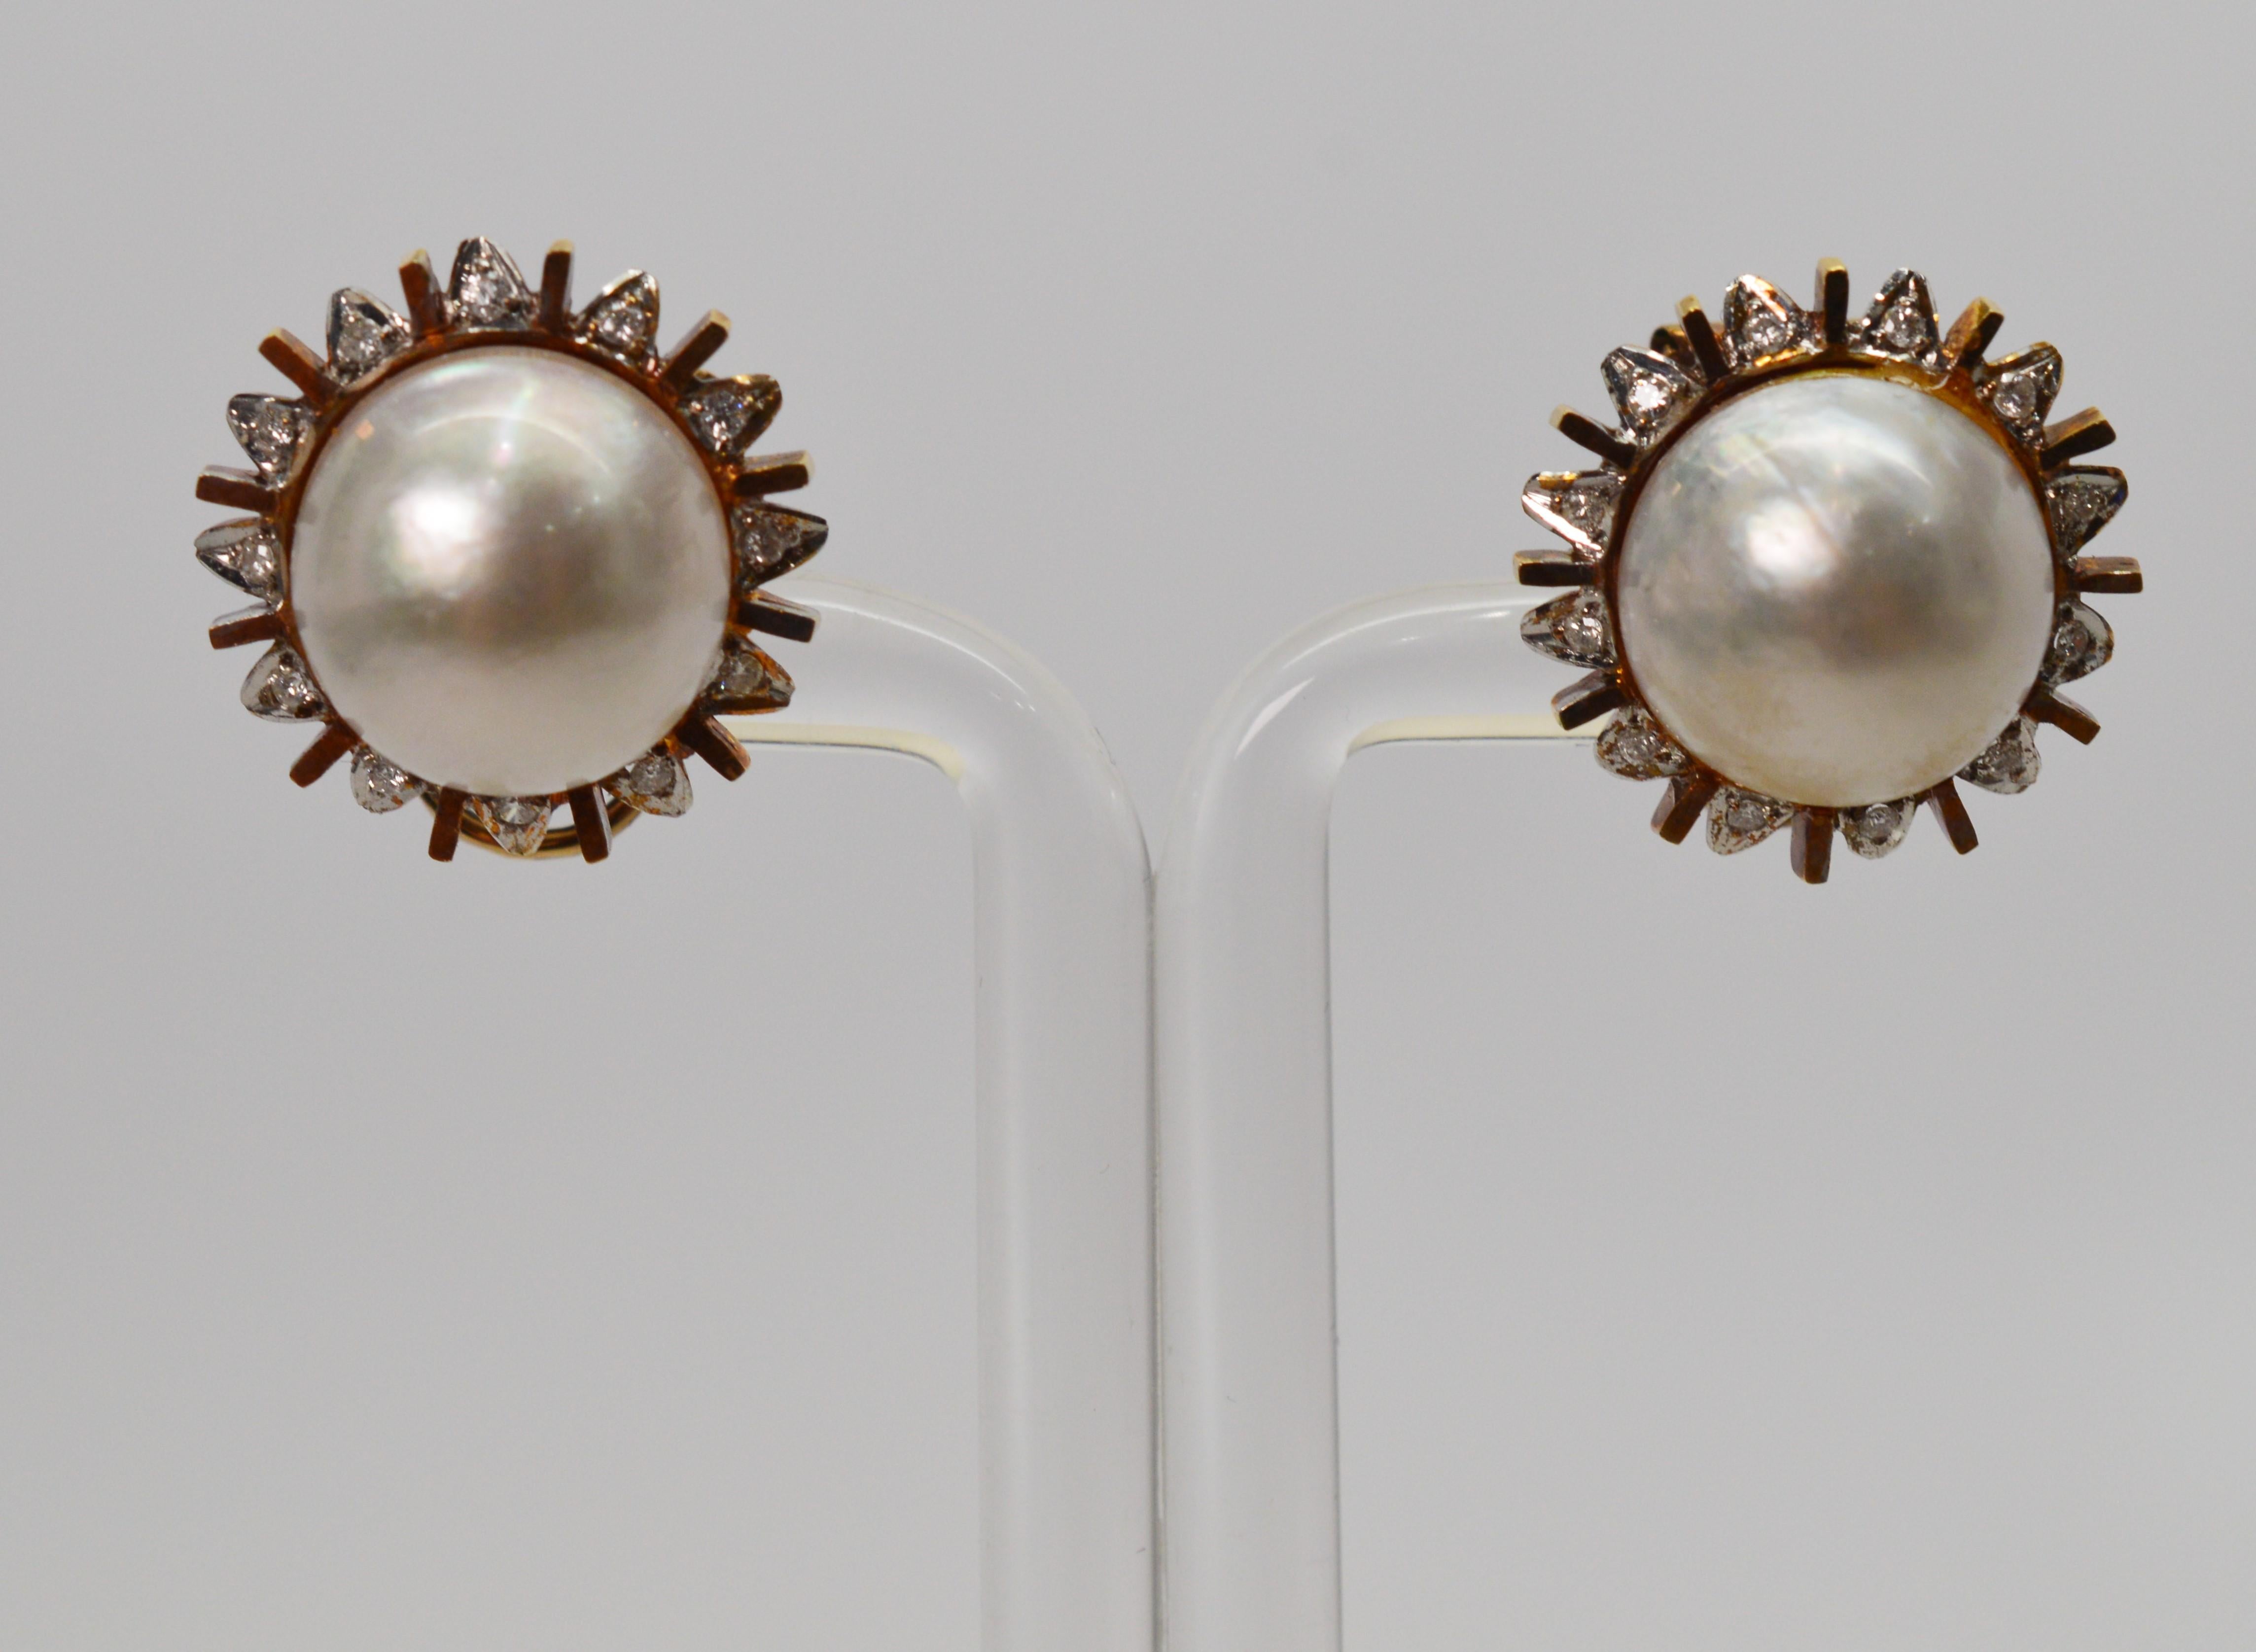 Rays of diamond and rose gold accent a sunny, naturally lustrous mobe pearl center on this attractive pair of pierced earrings. The mobe pearl measures 13 mm and the overall dimension is approximately 18.5 mm. These stud earrings are secured by a